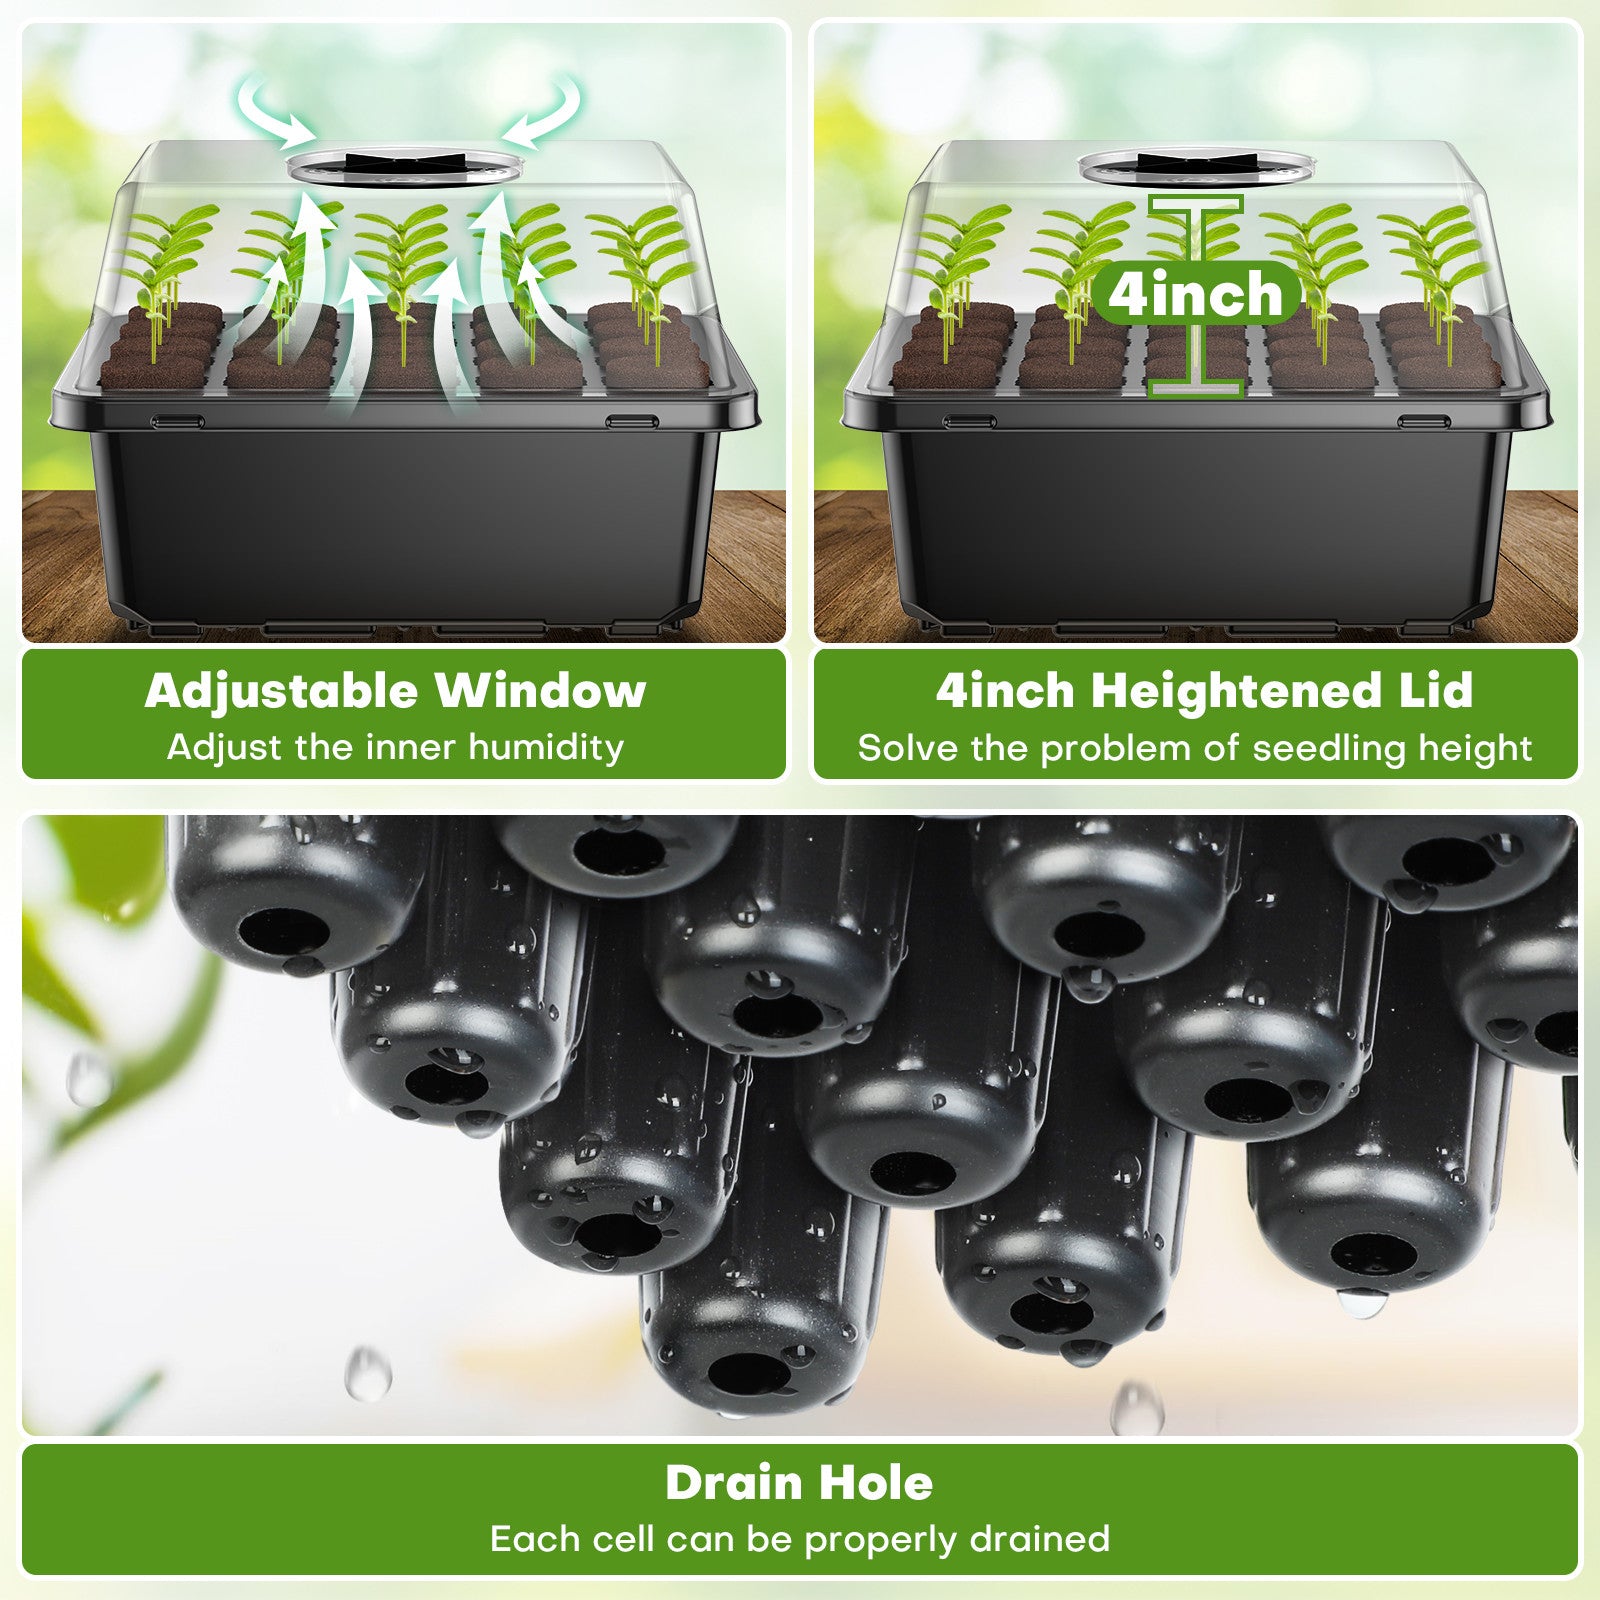 Key features of Ahope 40-Cell Seed Starting Trays